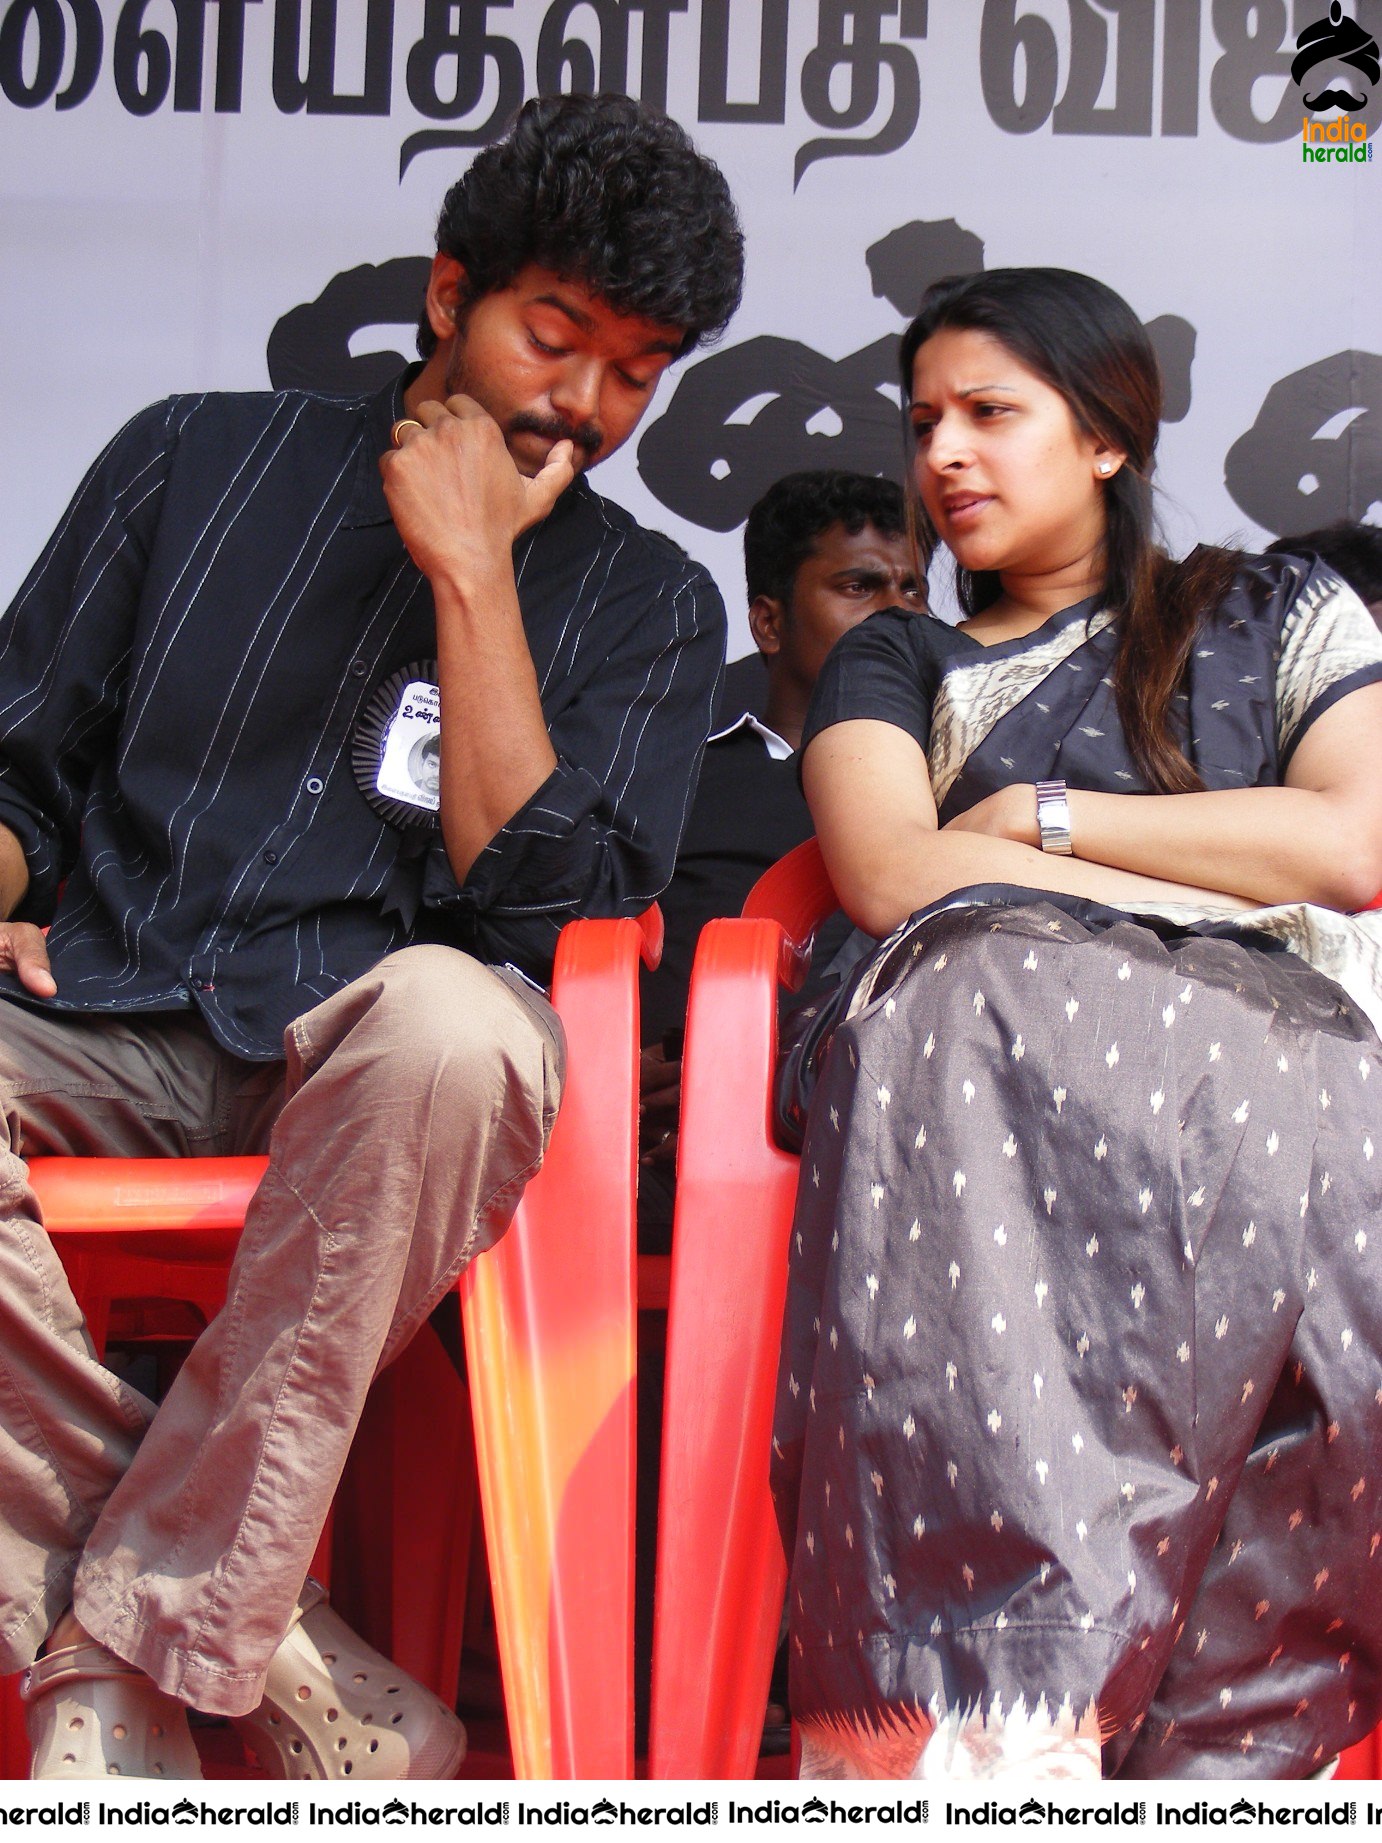 Actor Vijay with his wife while fasting for Eelam Tamils Set 2